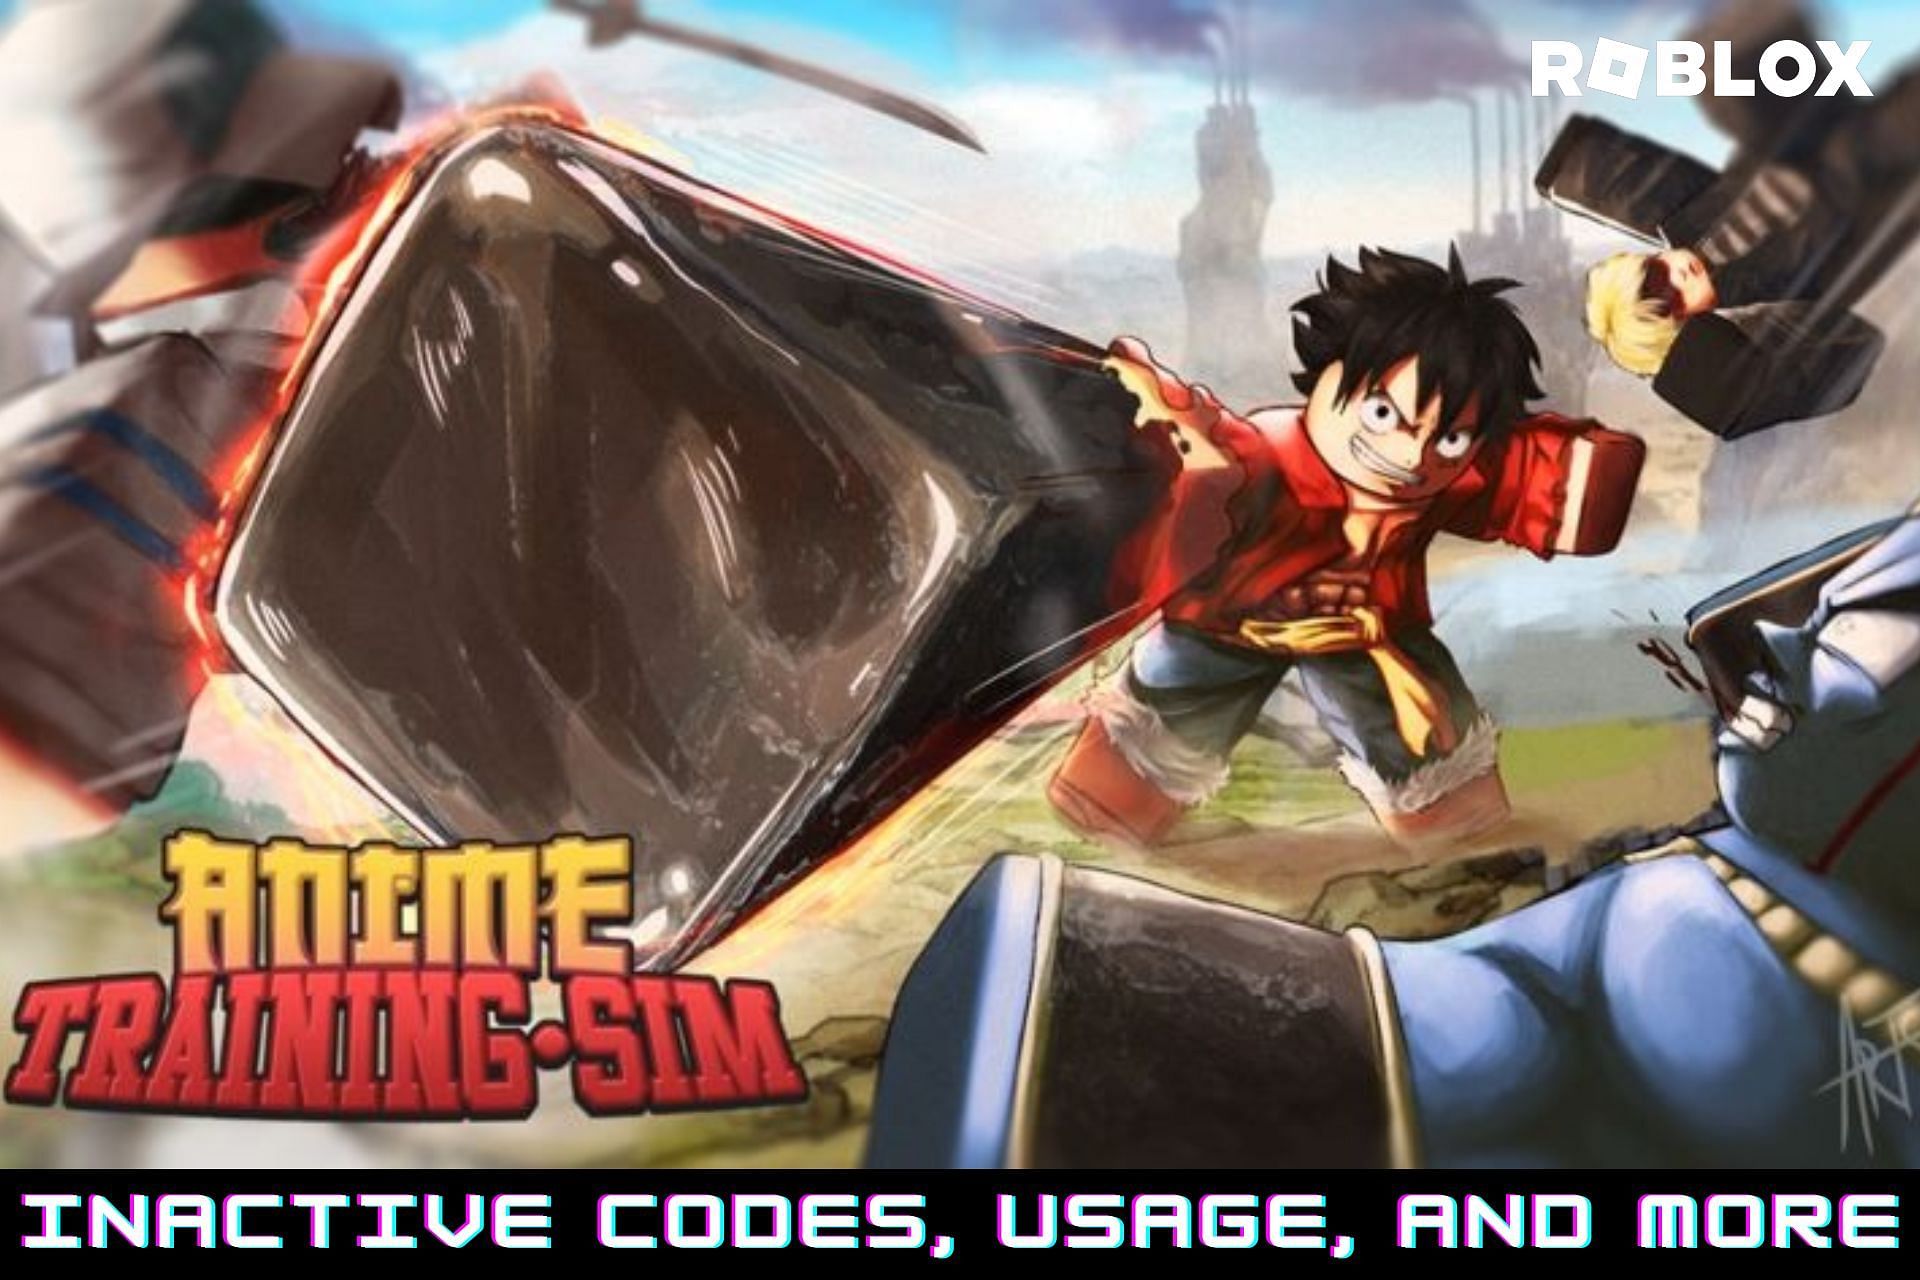 Anime Force Simulator Codes (September 2023) - Roblox